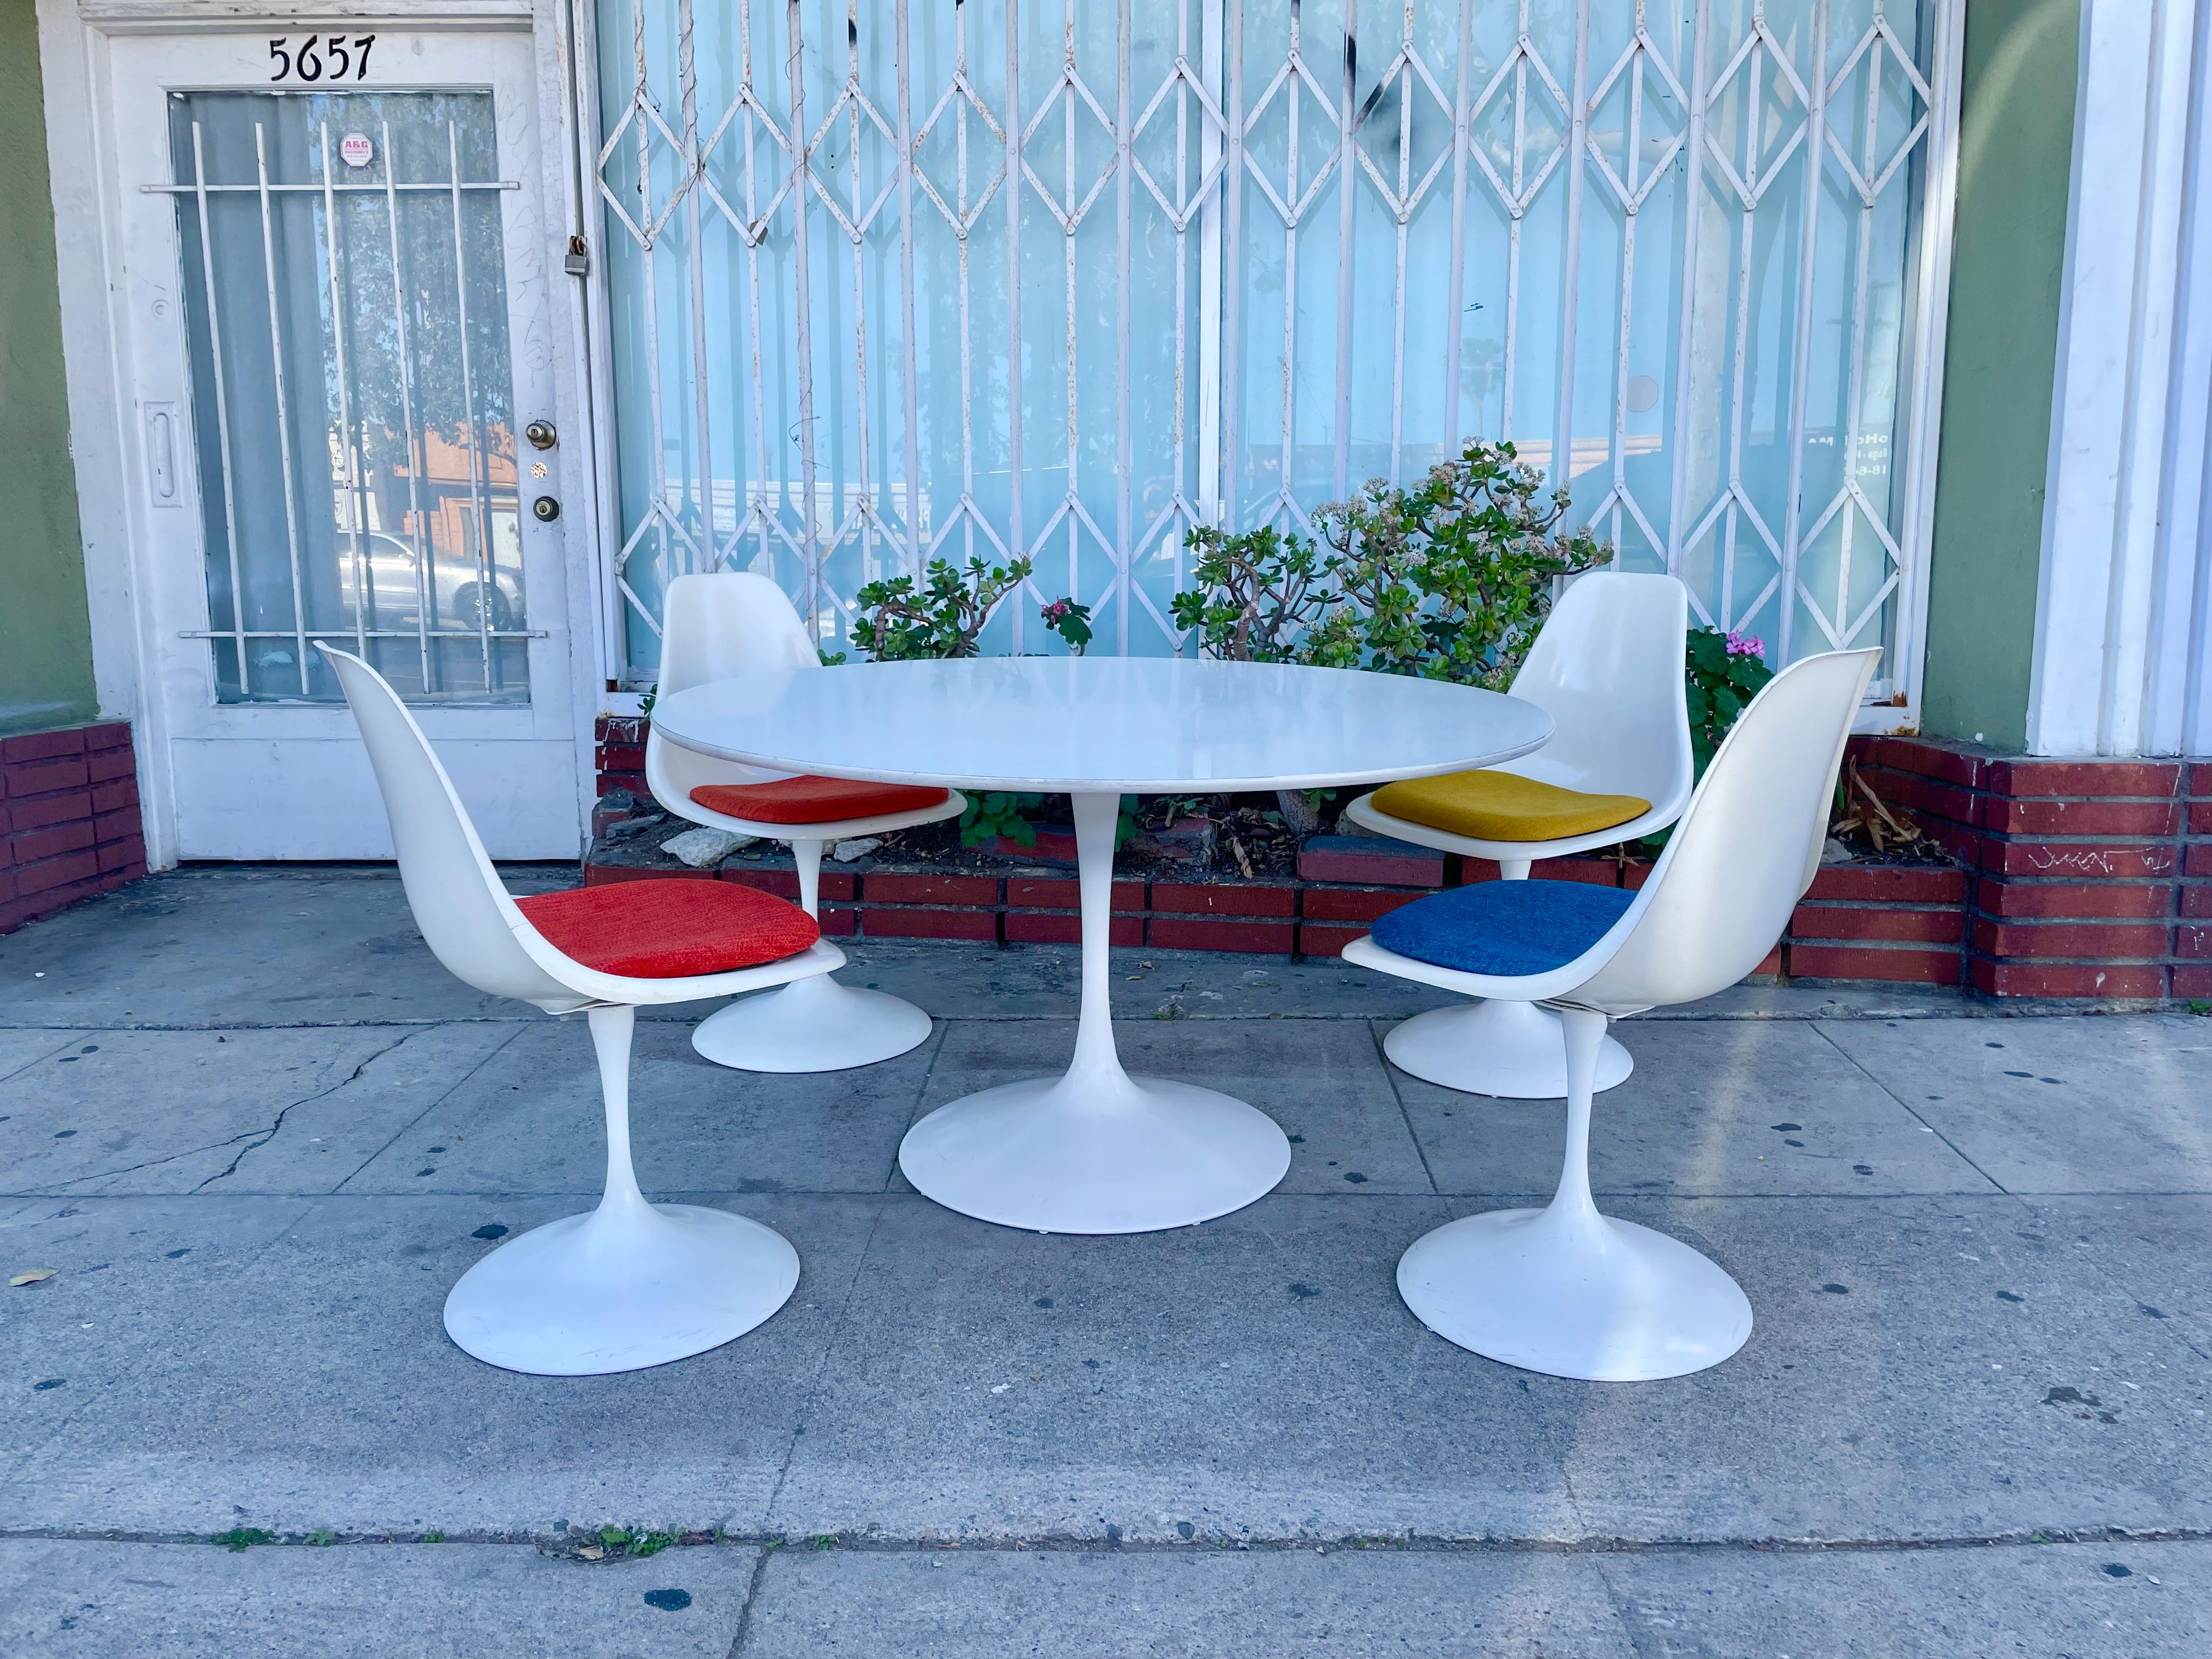 Midcentury tulip dining table styled after Eero Saarinen; This beautiful set is just so unique and amazing dining set. It features four armless swivel chairs that have a white lacquer finish. The table has a white wooden top and a cast iron metal